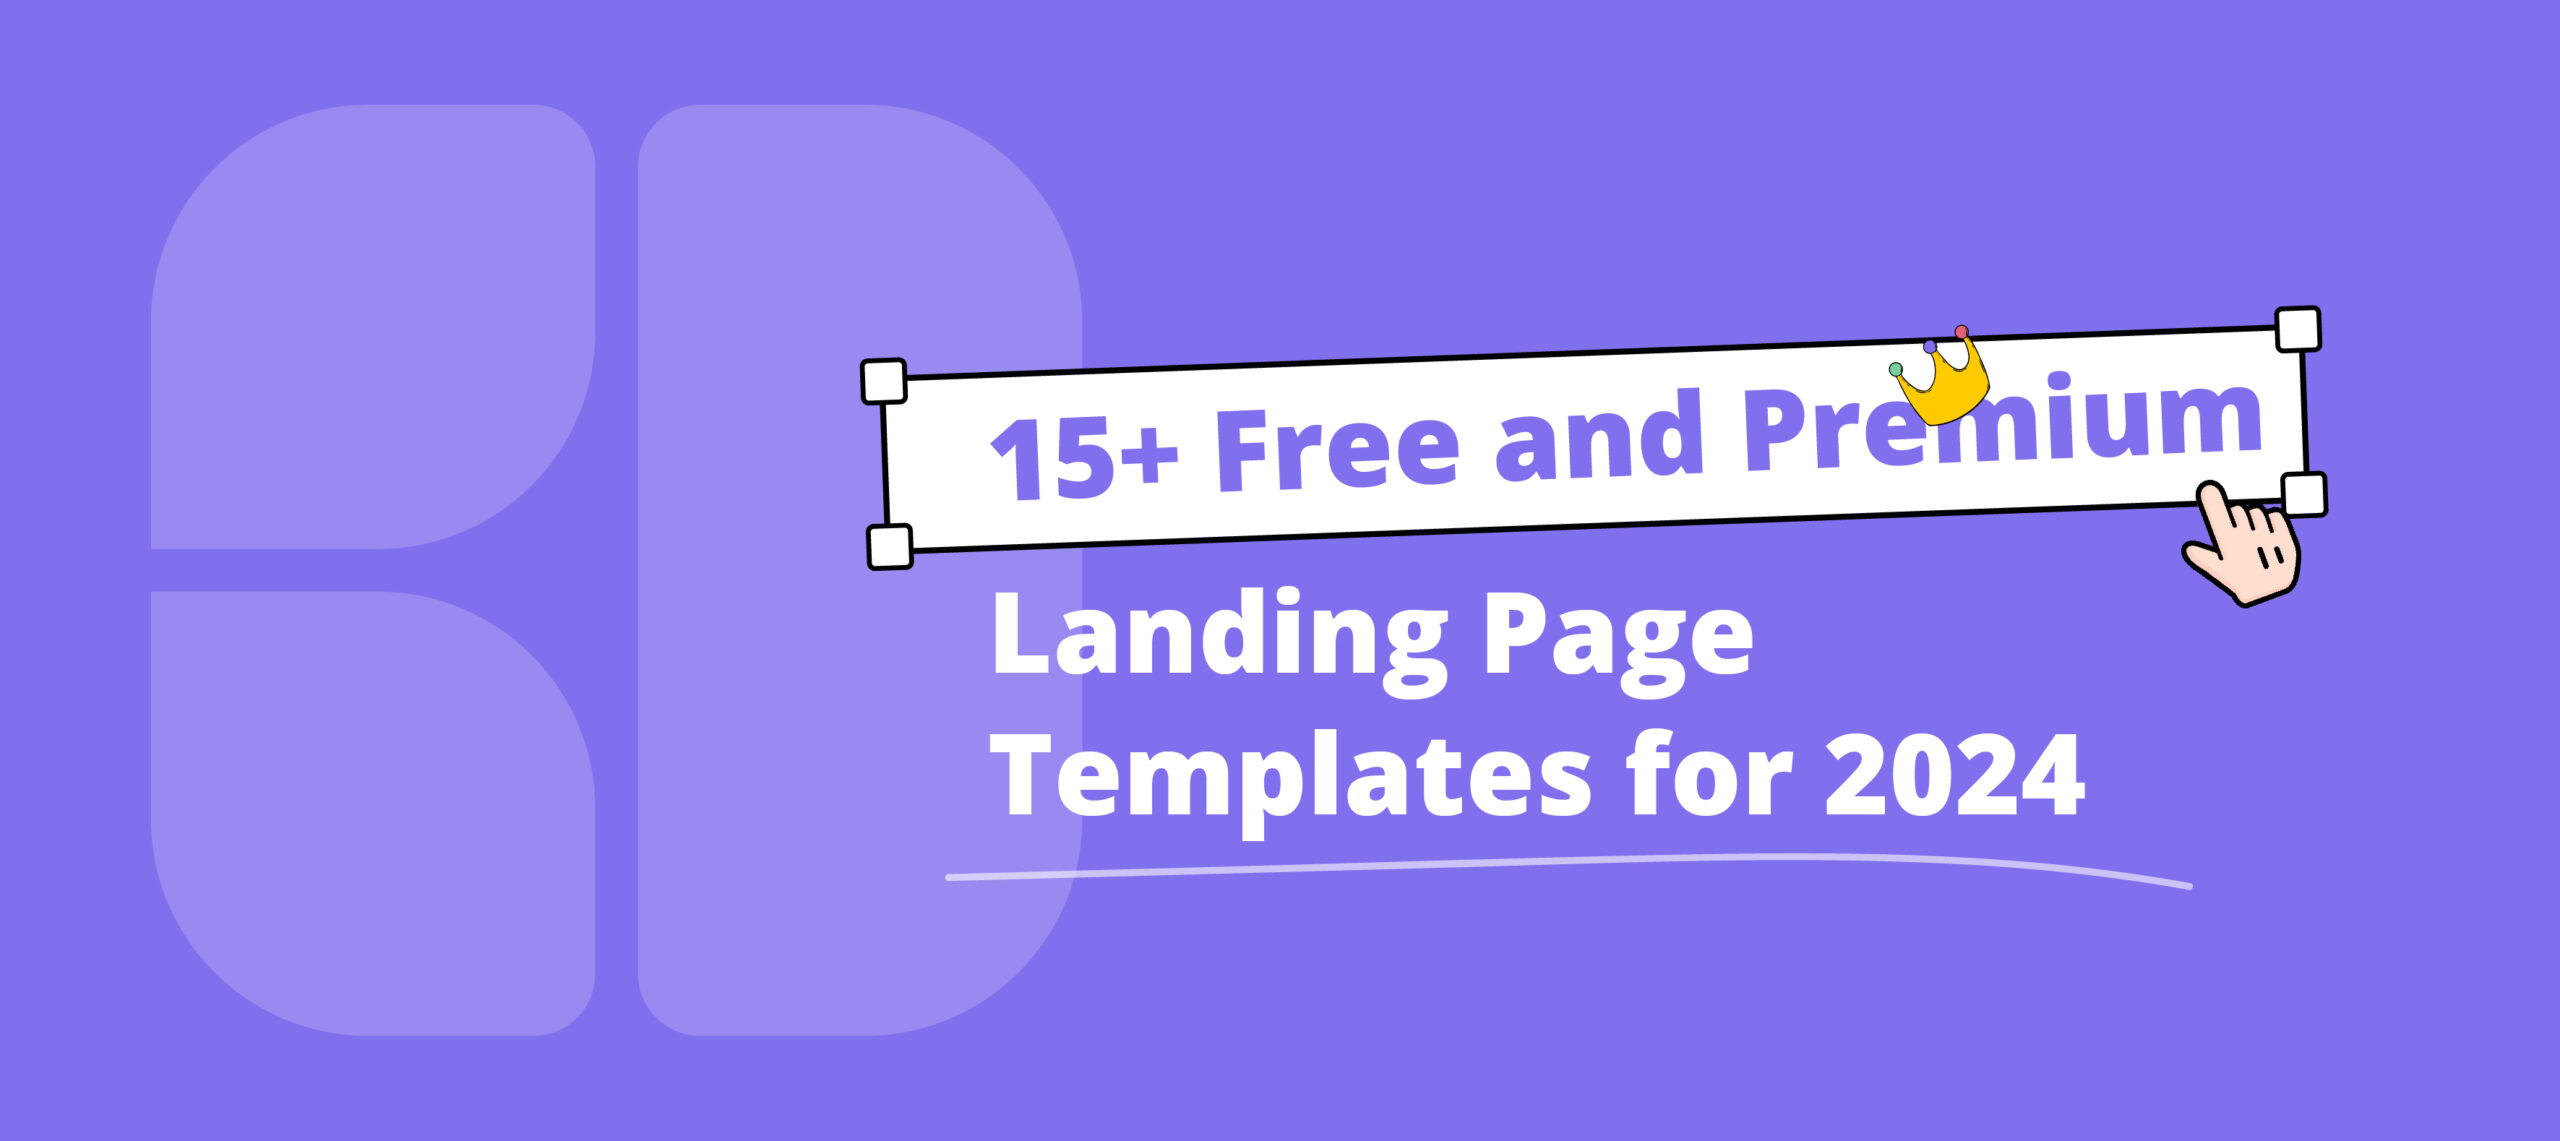  15+ Free and Premium Landing Page Templates for 2024